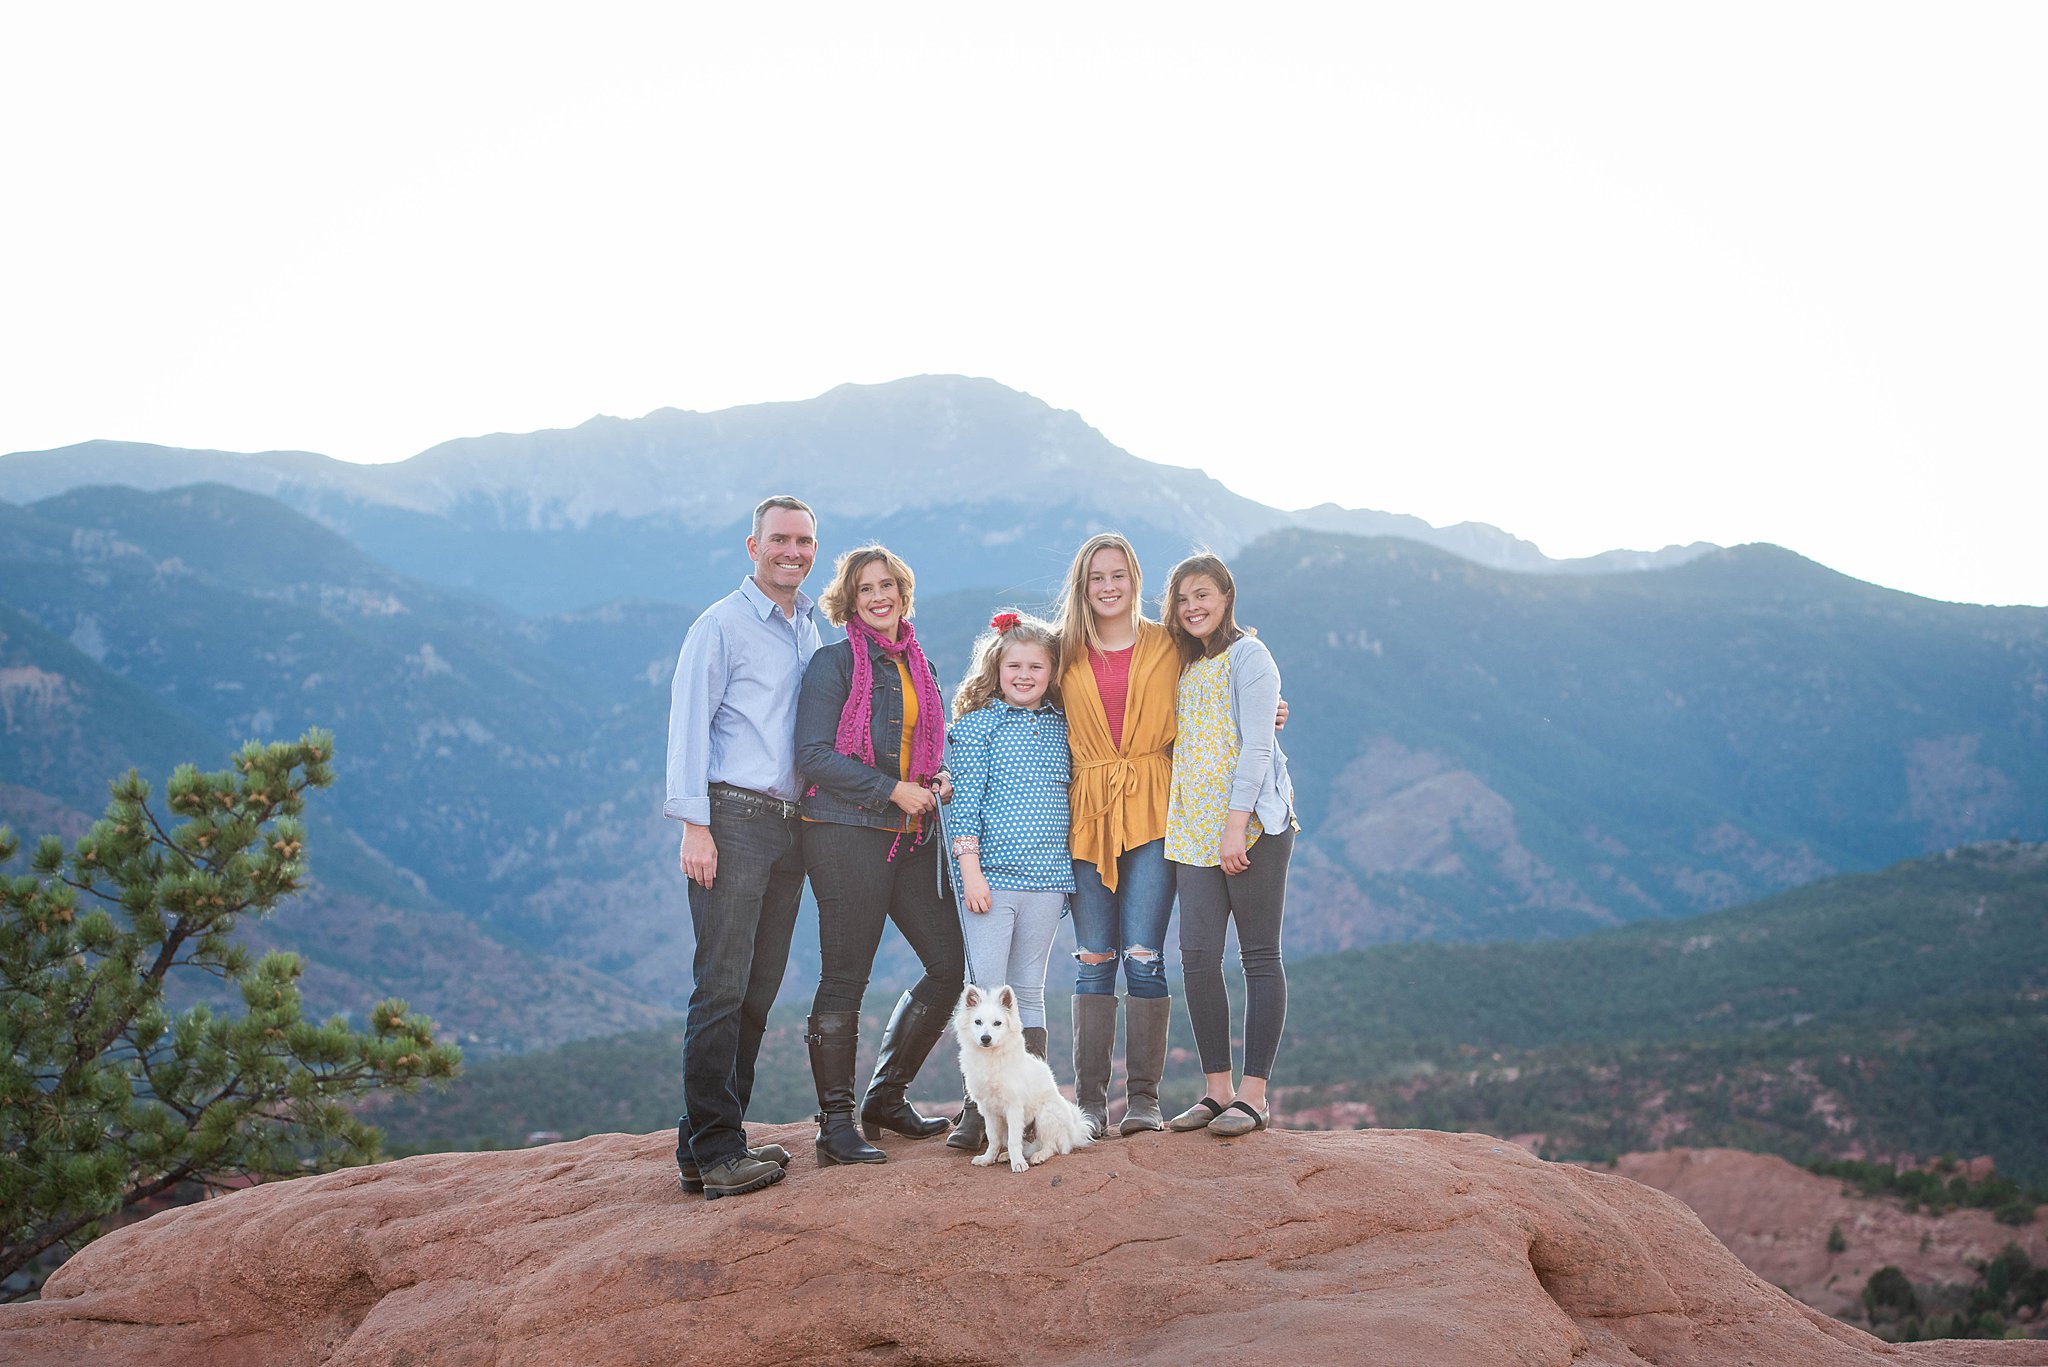 A family of 5 stand together on a mountain trail rock after visiting colorado springs yoga studios